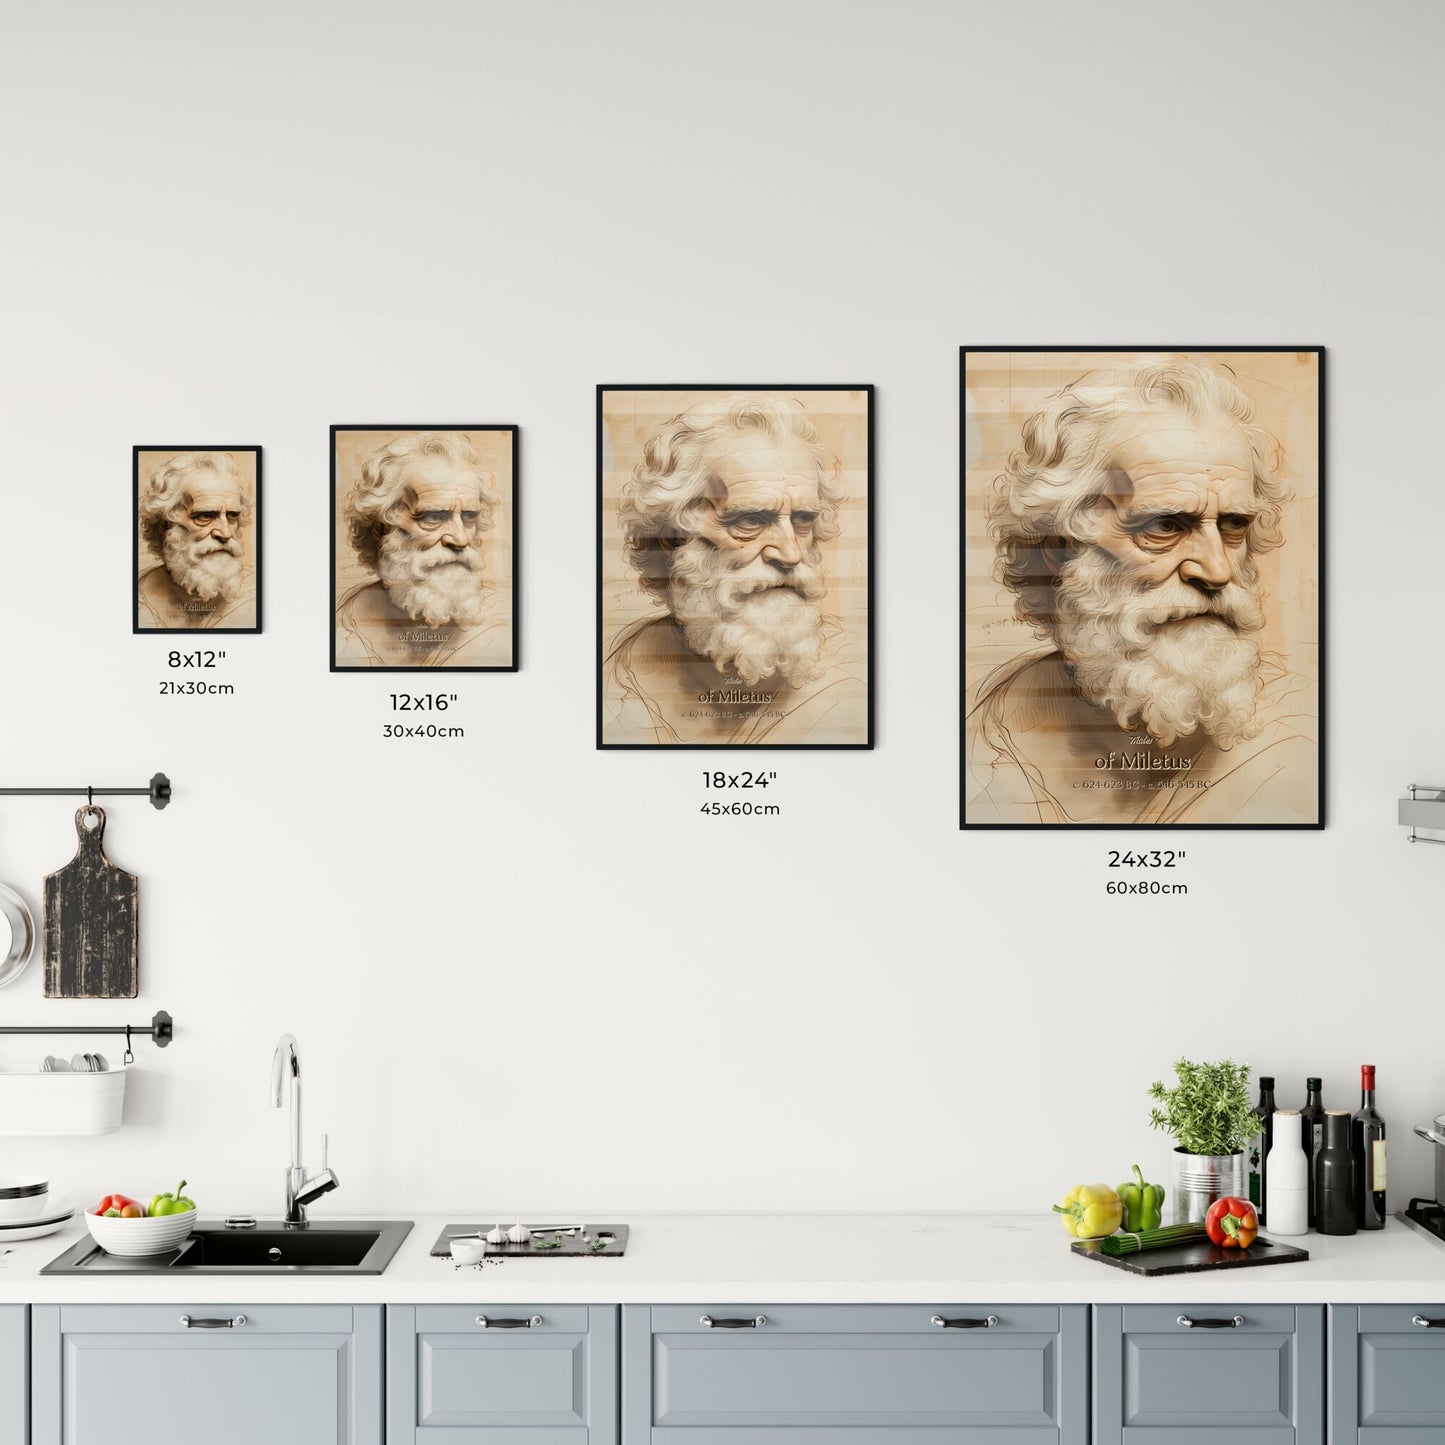 Thales, of Miletus, c. 624-623 BC - c. 546-545 BC, A Poster of a drawing of a man with a beard Default Title